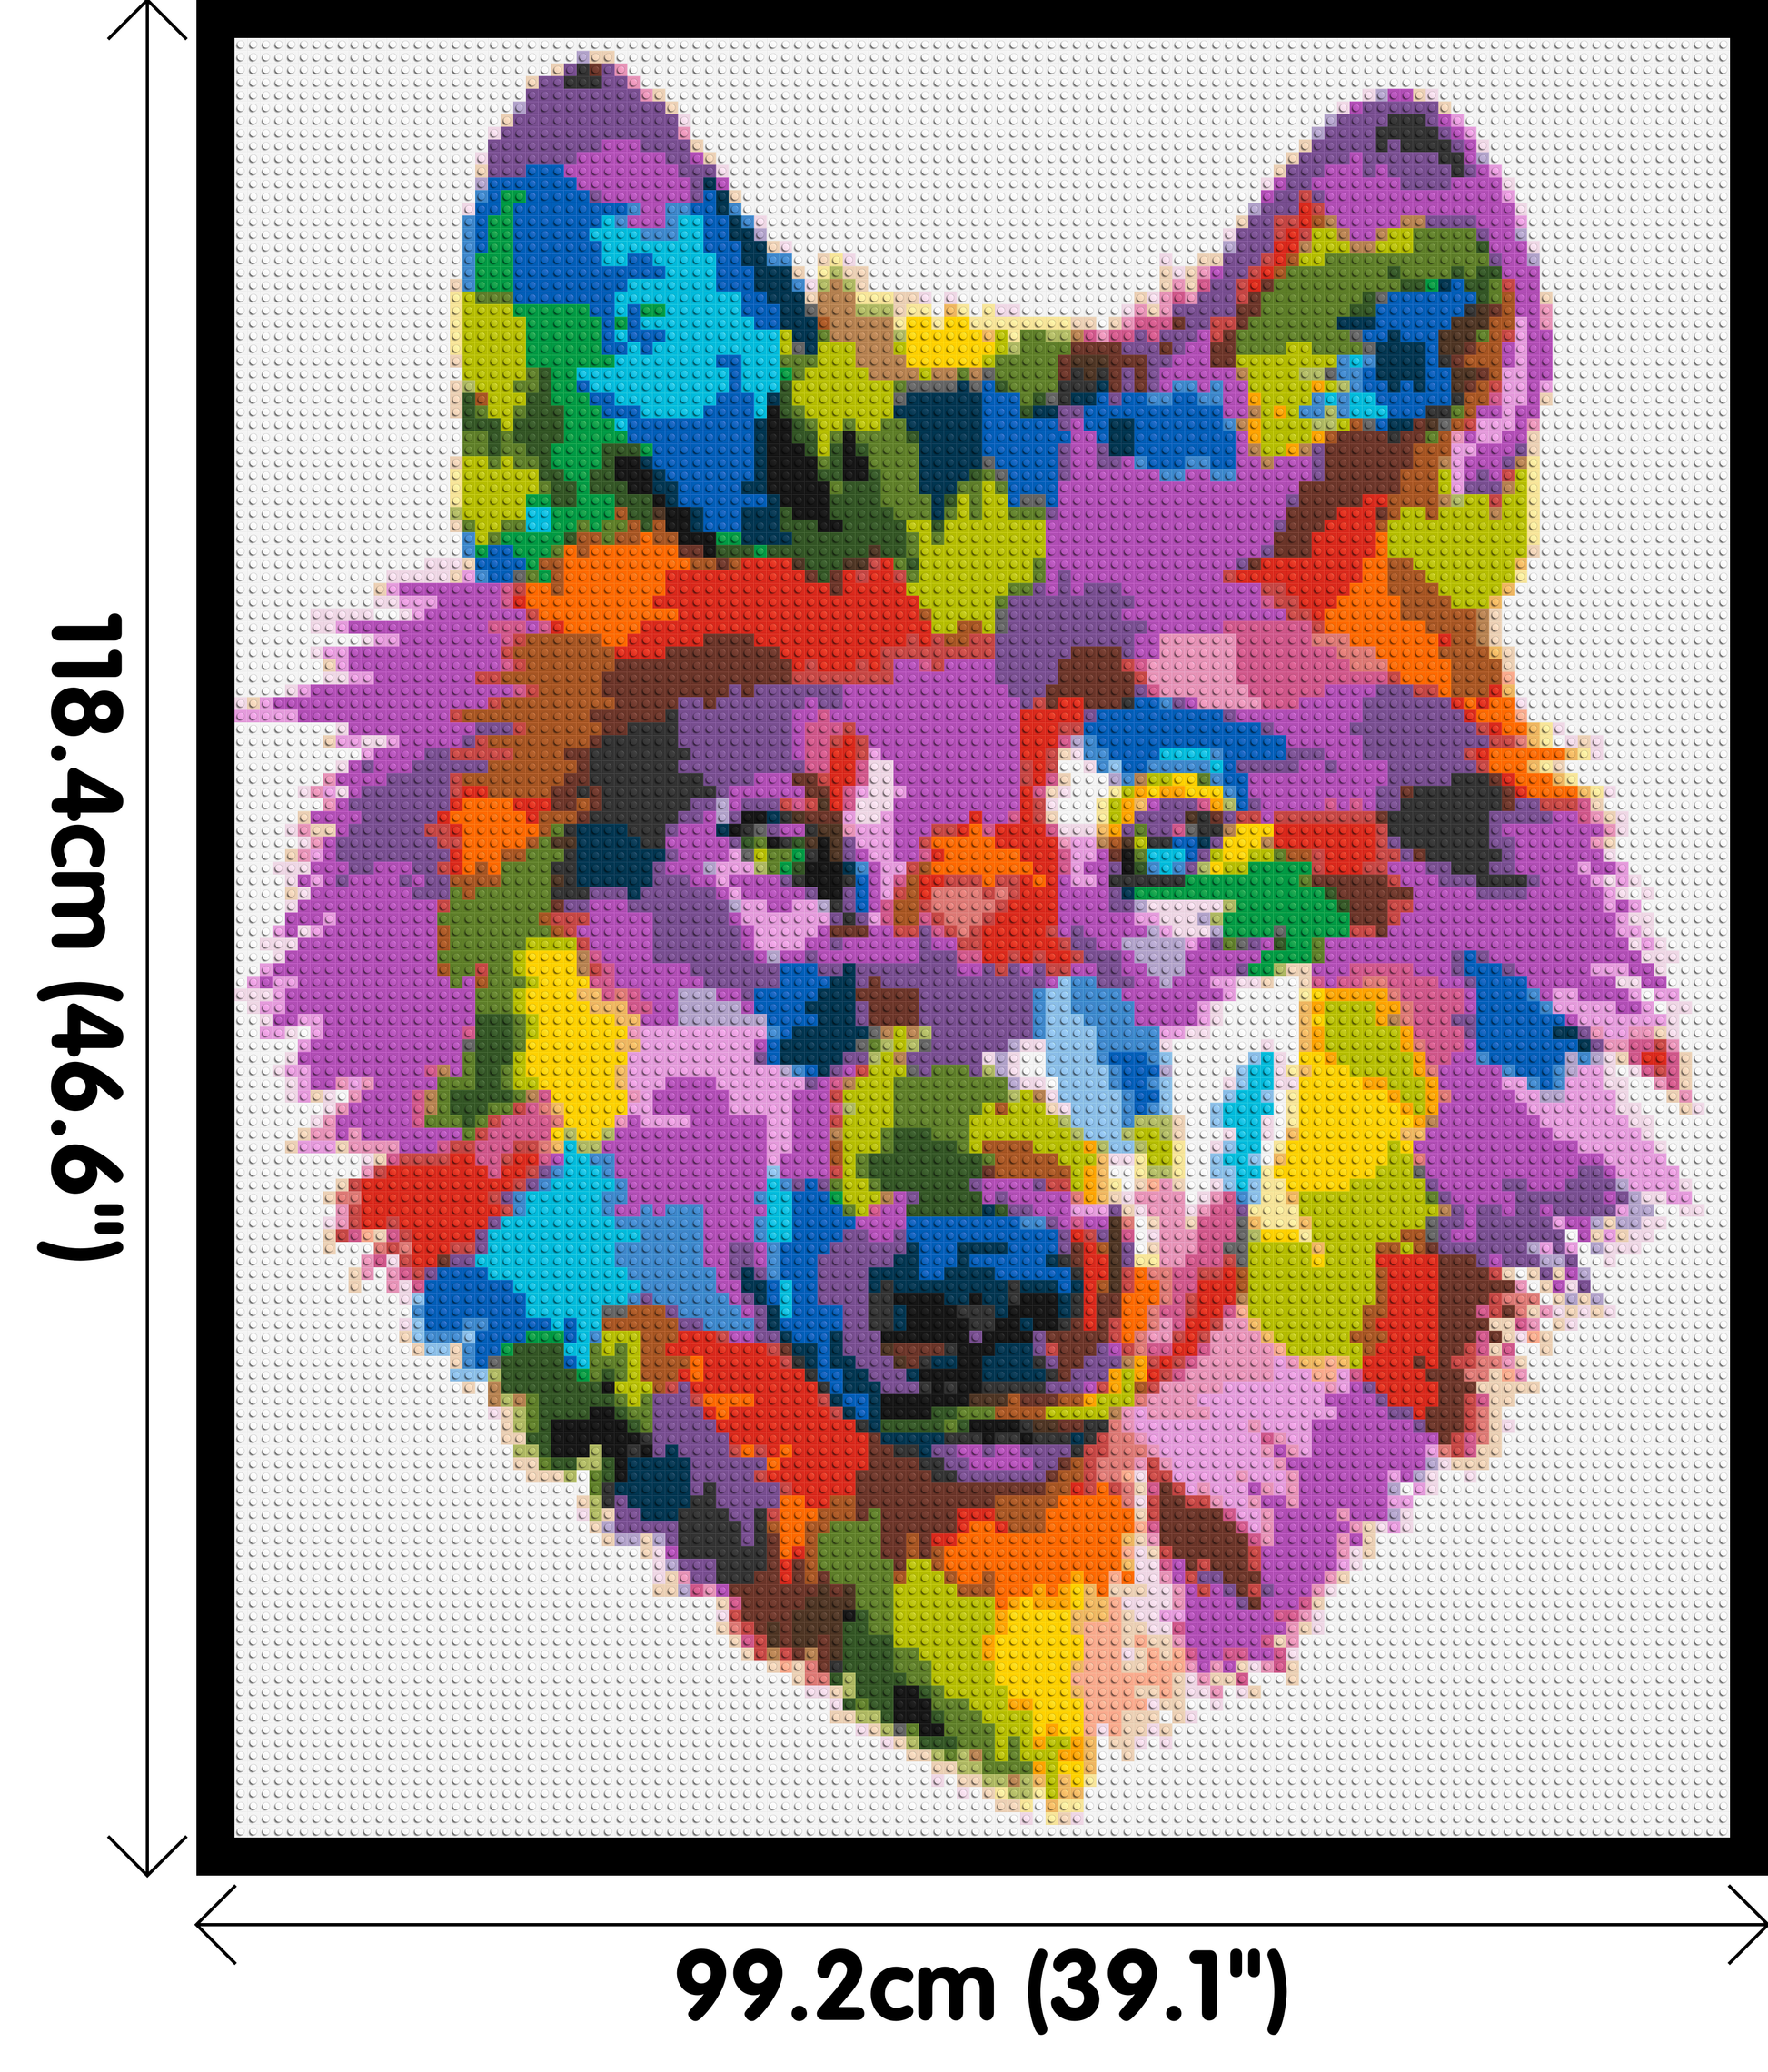 Wolf Colourful Pop Art - Brick Art Mosaic Kit 5x6 dimensions with frame